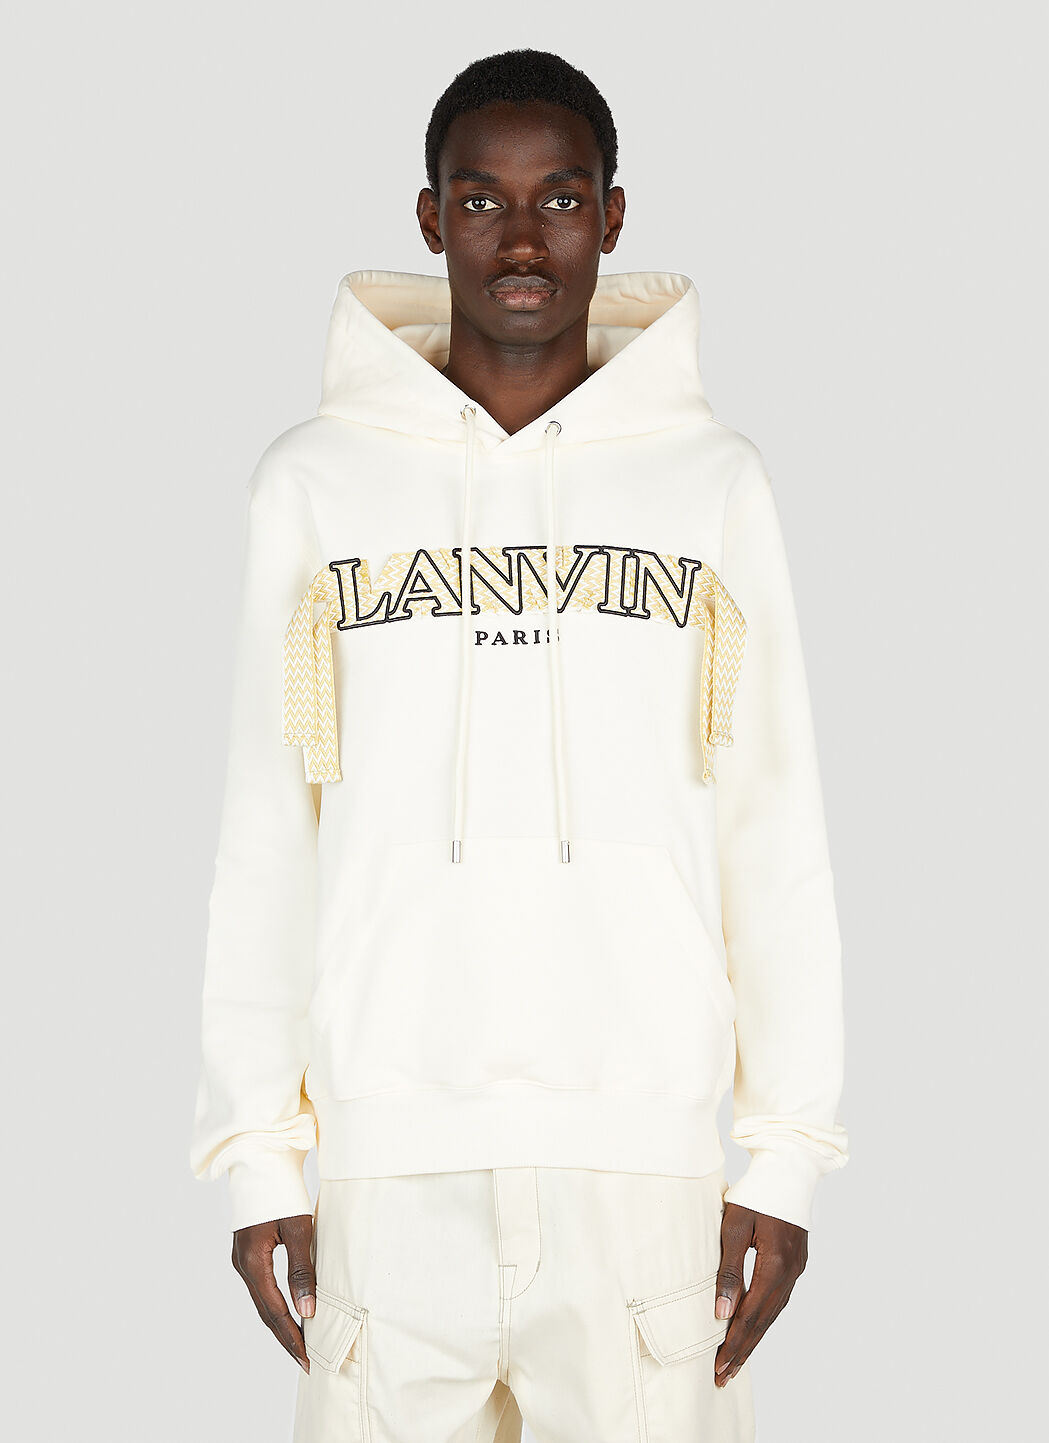 Lanvin Sneakers, Clothes & Bags for Men | Order now at LN-CC®